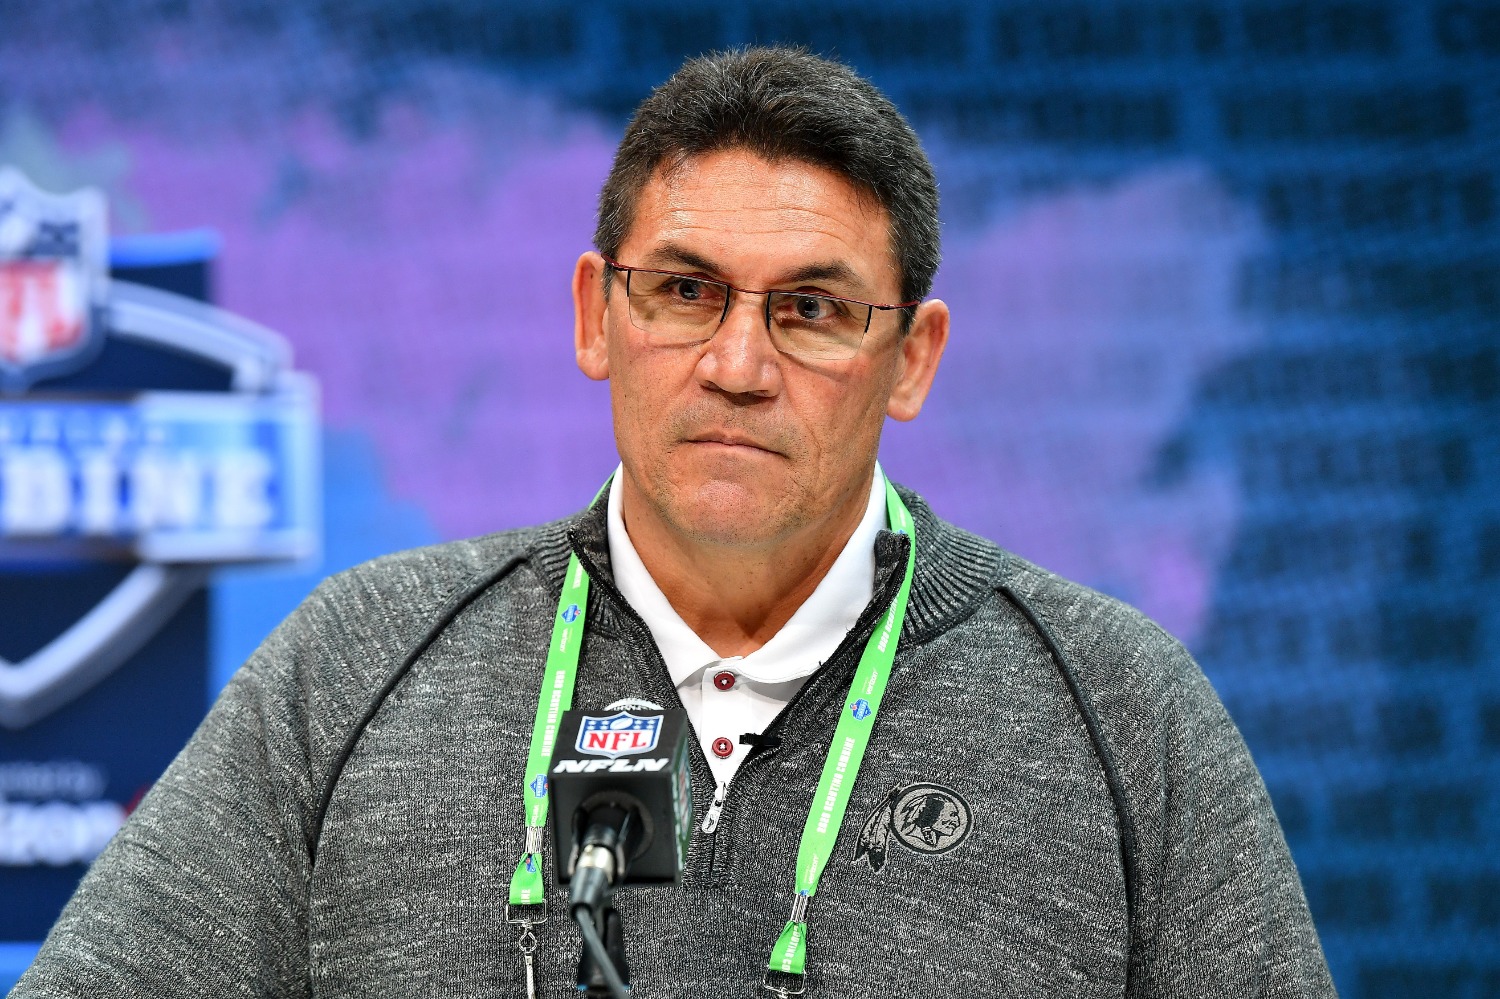 Washington Football Team head coach Ron Rivera has encountered a new opponent in the form of cancer.